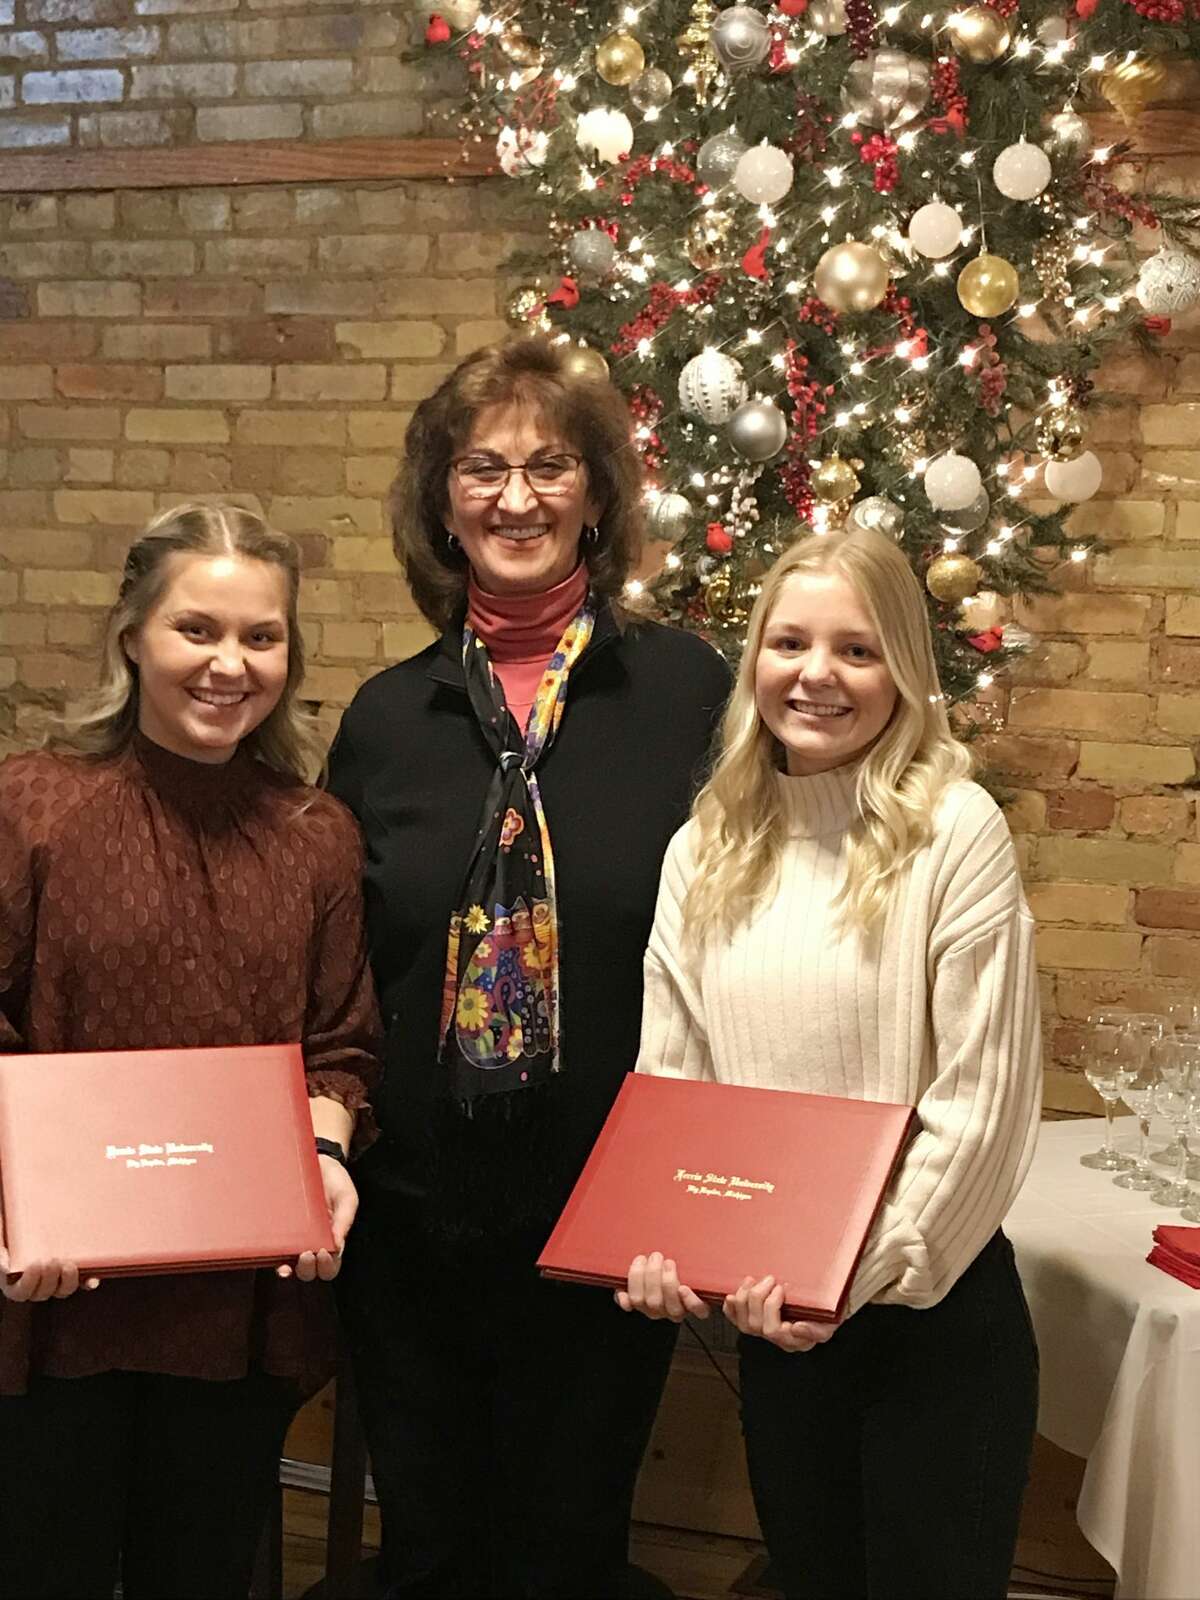 Pictured, the from the left, is Breanna Green, award recipient; Jennifer Cochran, president of AAUW-Big Rapids; and Brooke Jacobs, award recipient.